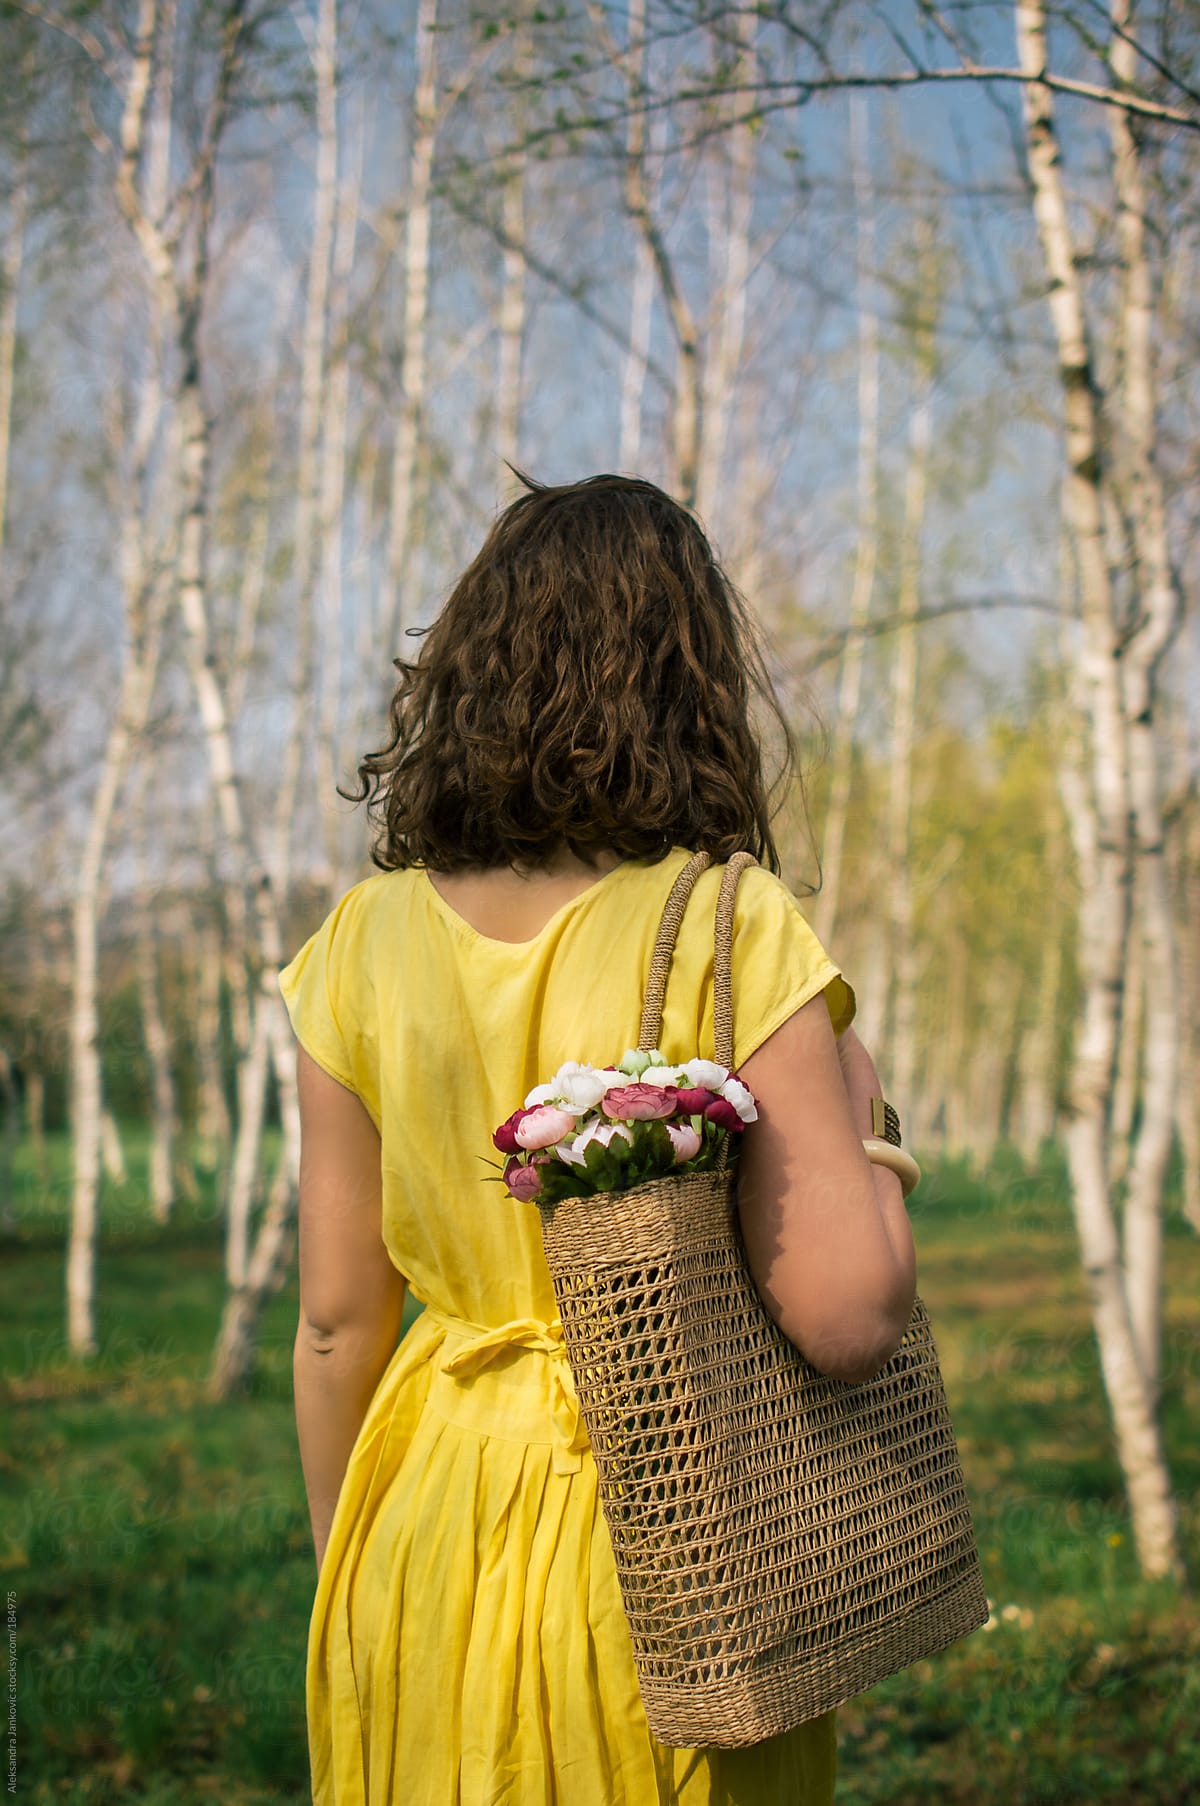 Anonymous Woman In Yellow Dress Holding A Bag With Flowers